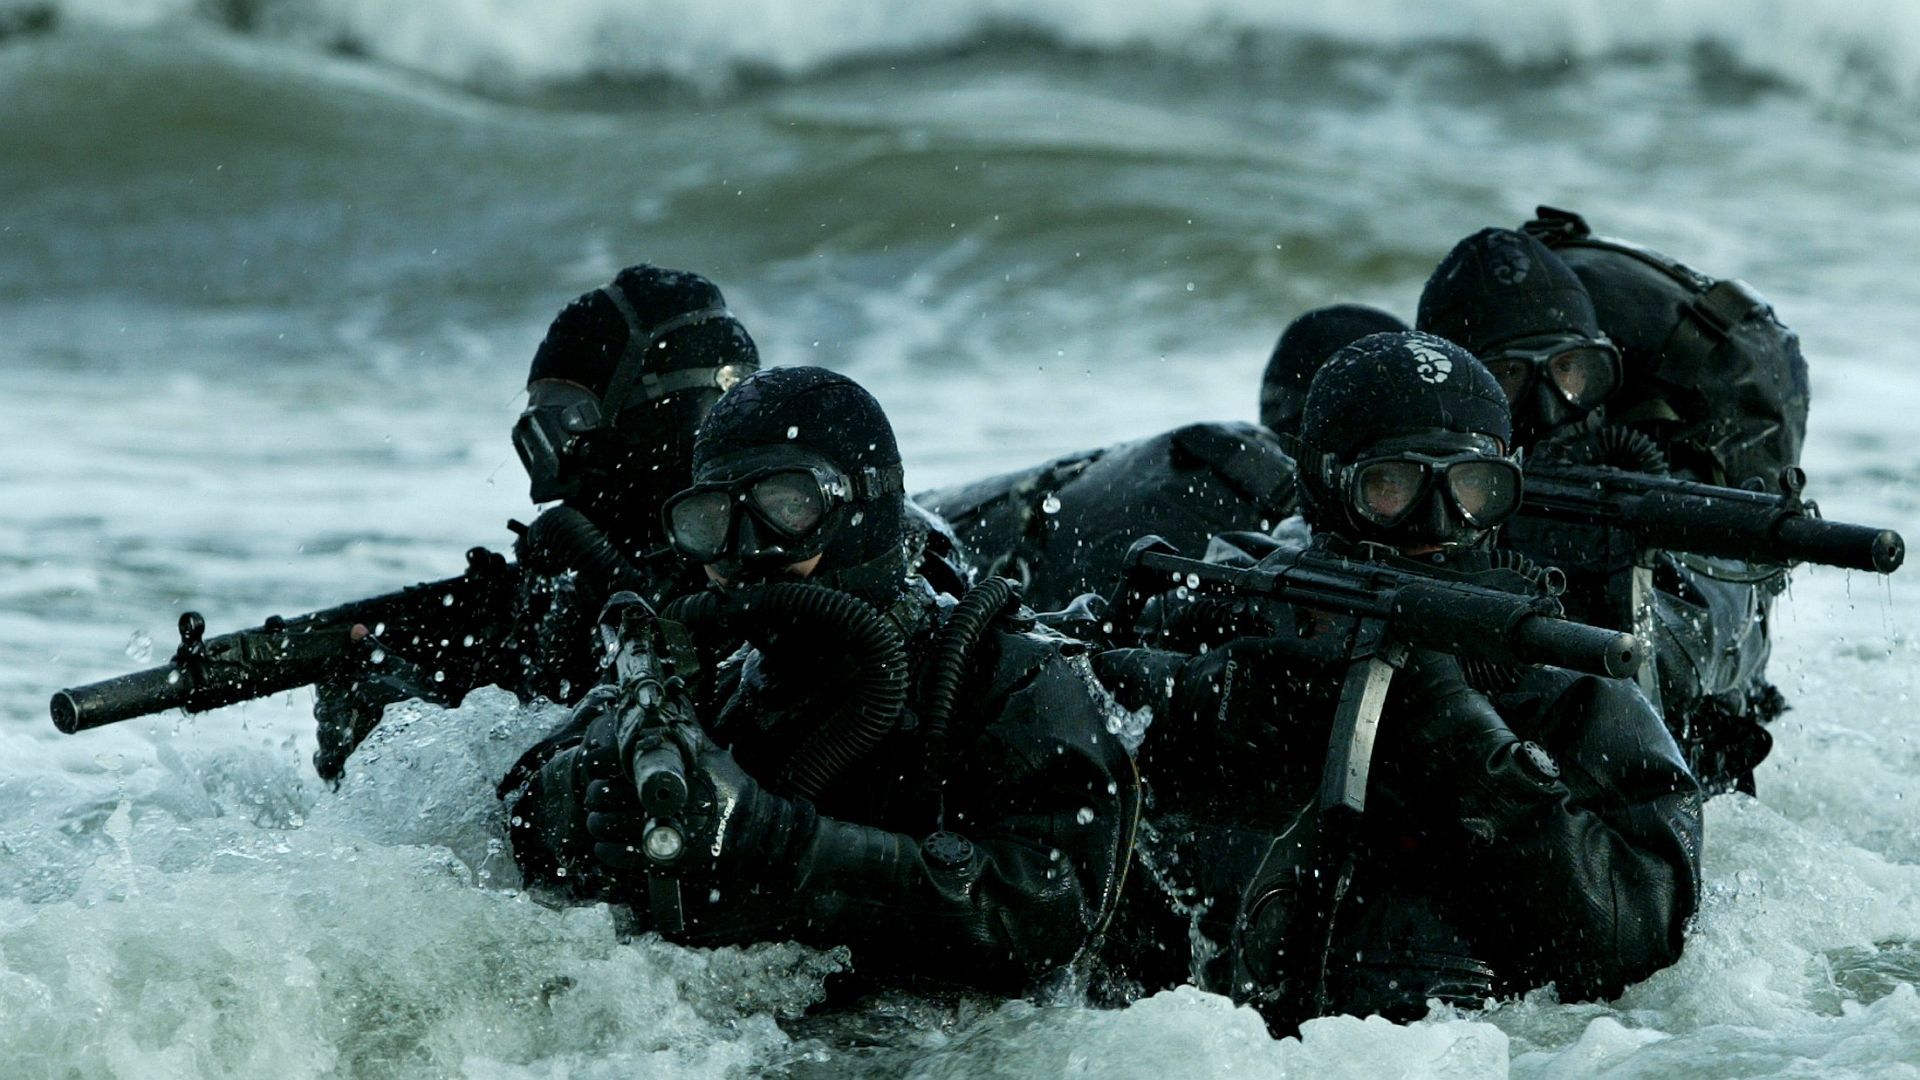 Military Wallpaper. Special forces, Us navy seals, Navy seals